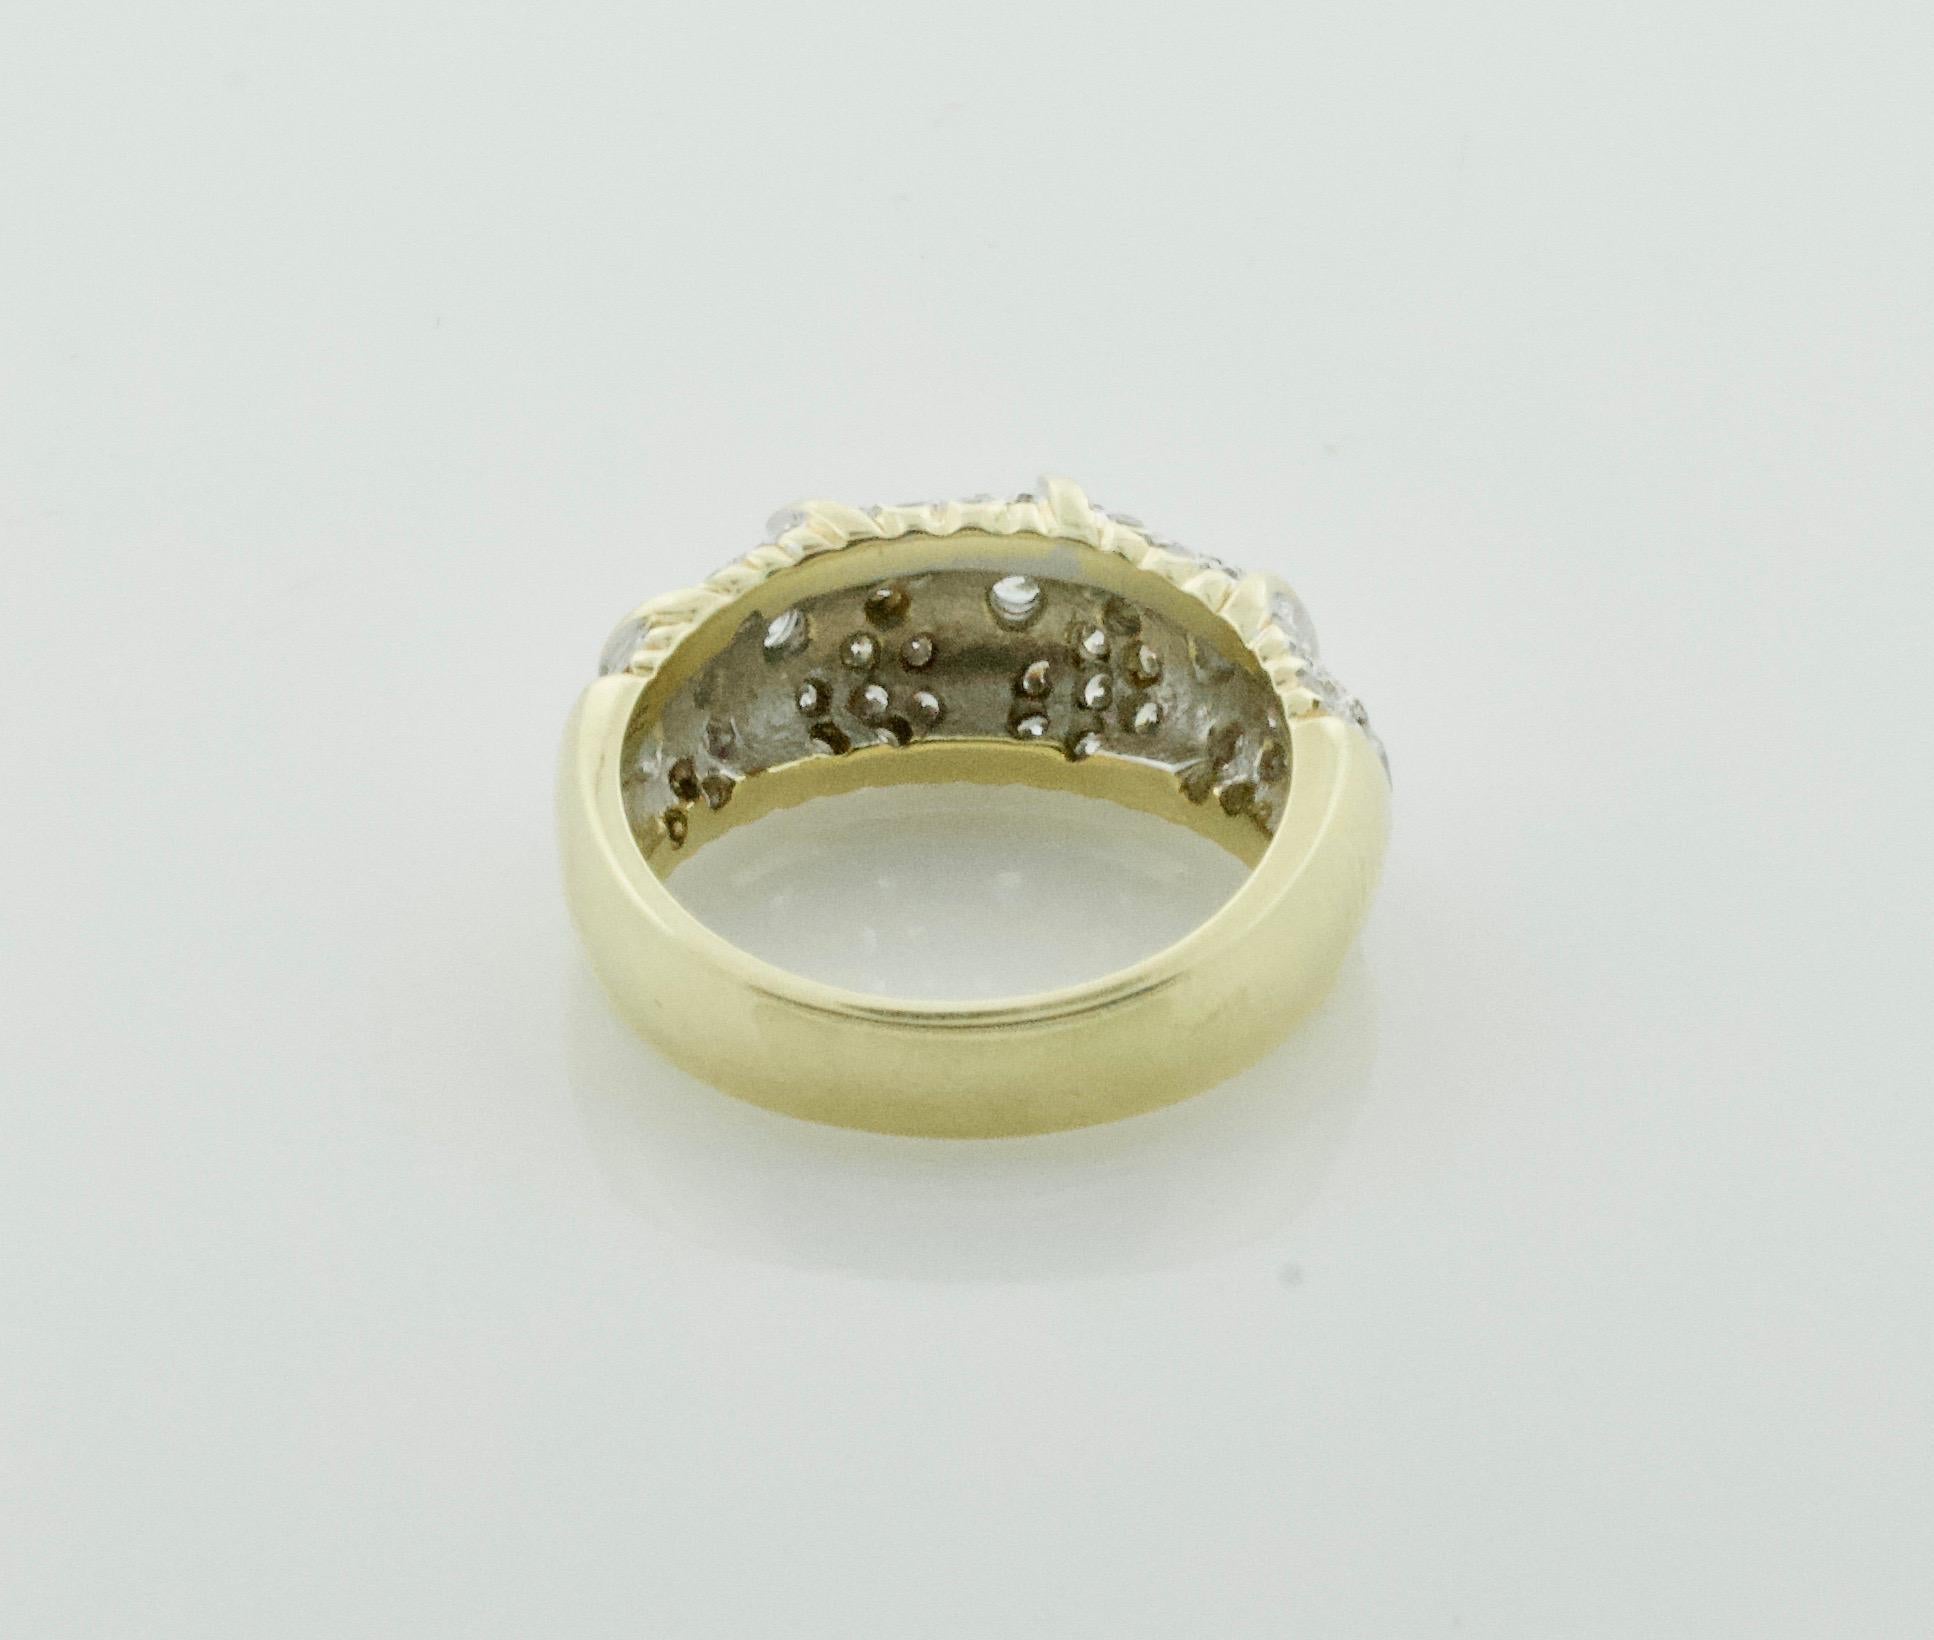 Diamond Wedding Band in Yellow Gold 1.20 Carat In Excellent Condition For Sale In Wailea, HI